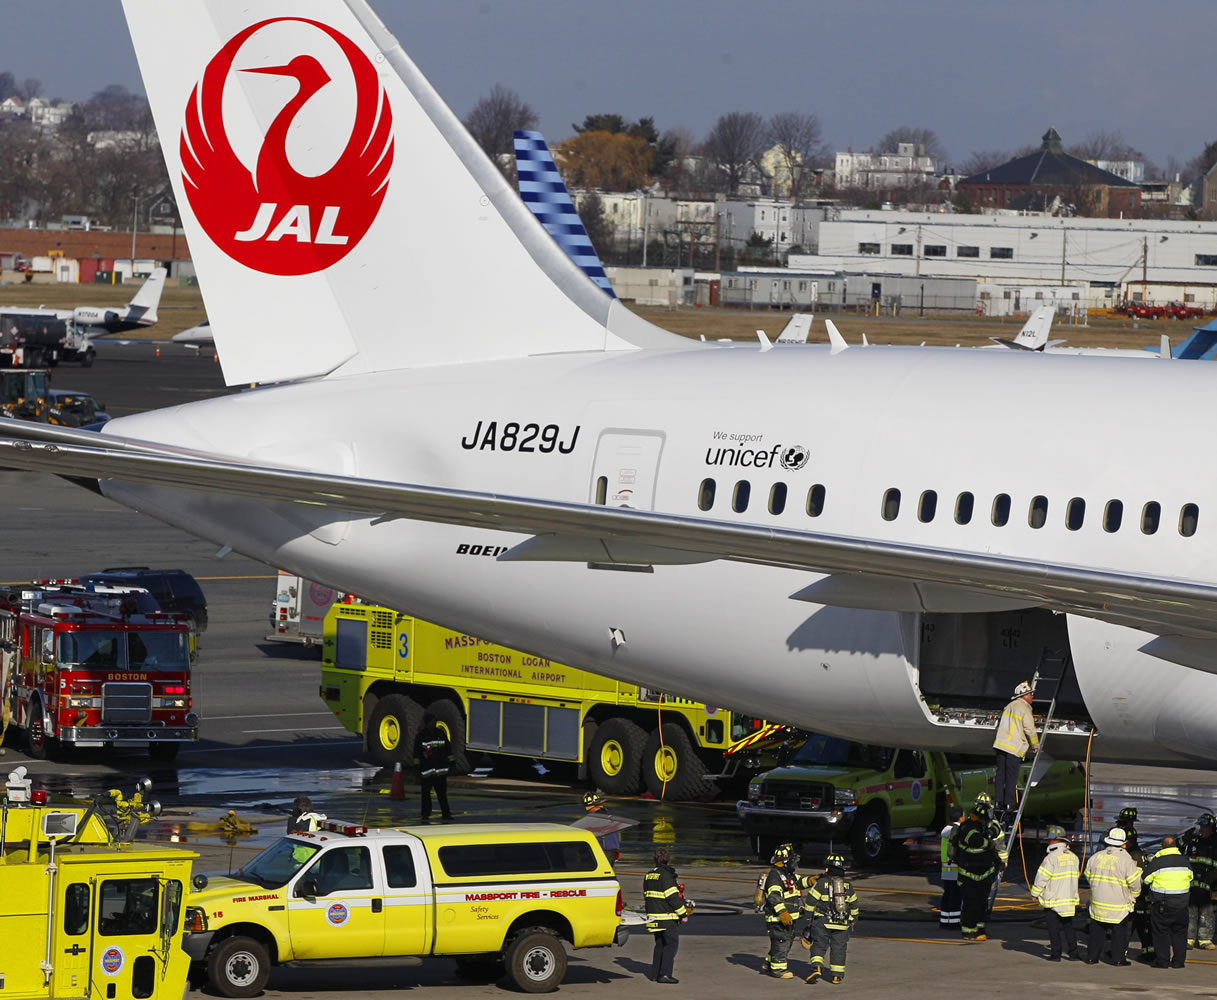 A Japan Airlines Boeing 787 jet aircraft is surrounded by emergency vehicles while parked at a terminal at Logan International Airport in Boston on Jan.